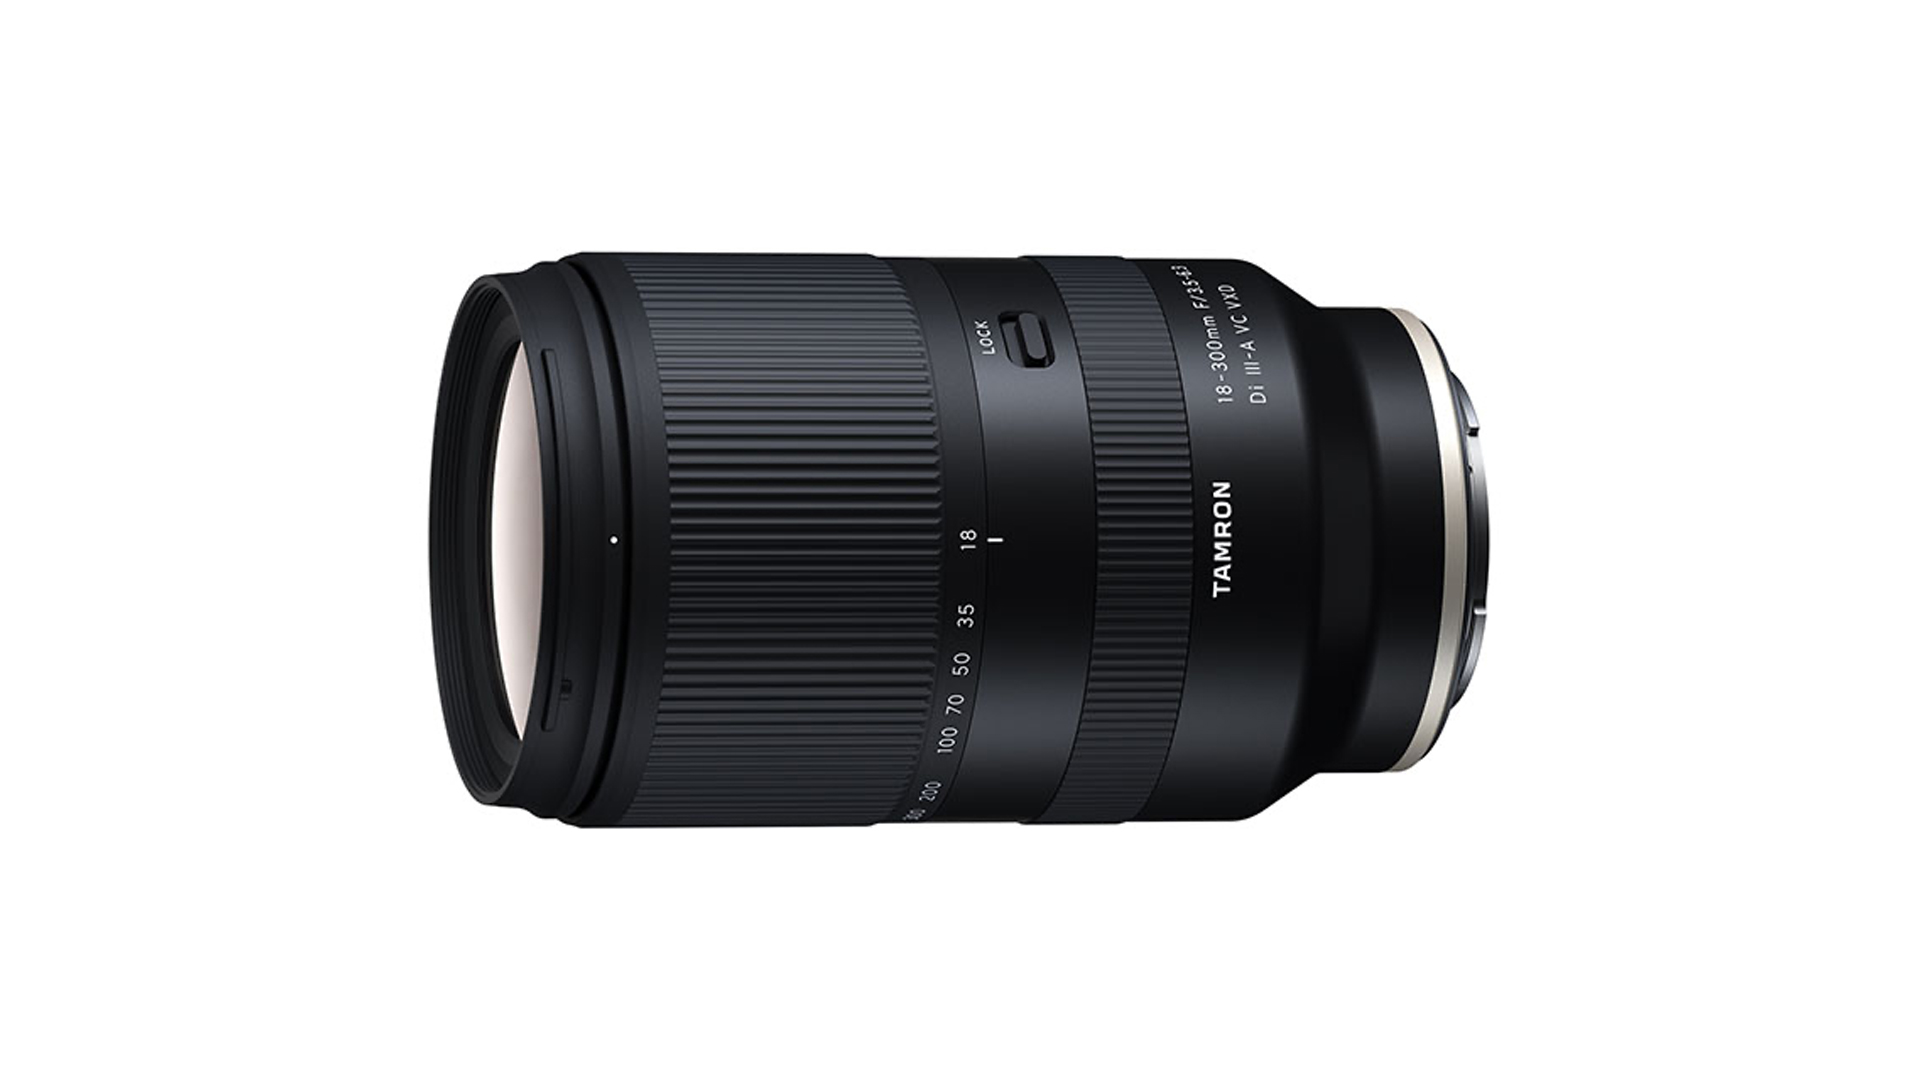 Tamron 18-300mm F3.5-6.3 Zoom for FUJIFILM and Sony Cameras